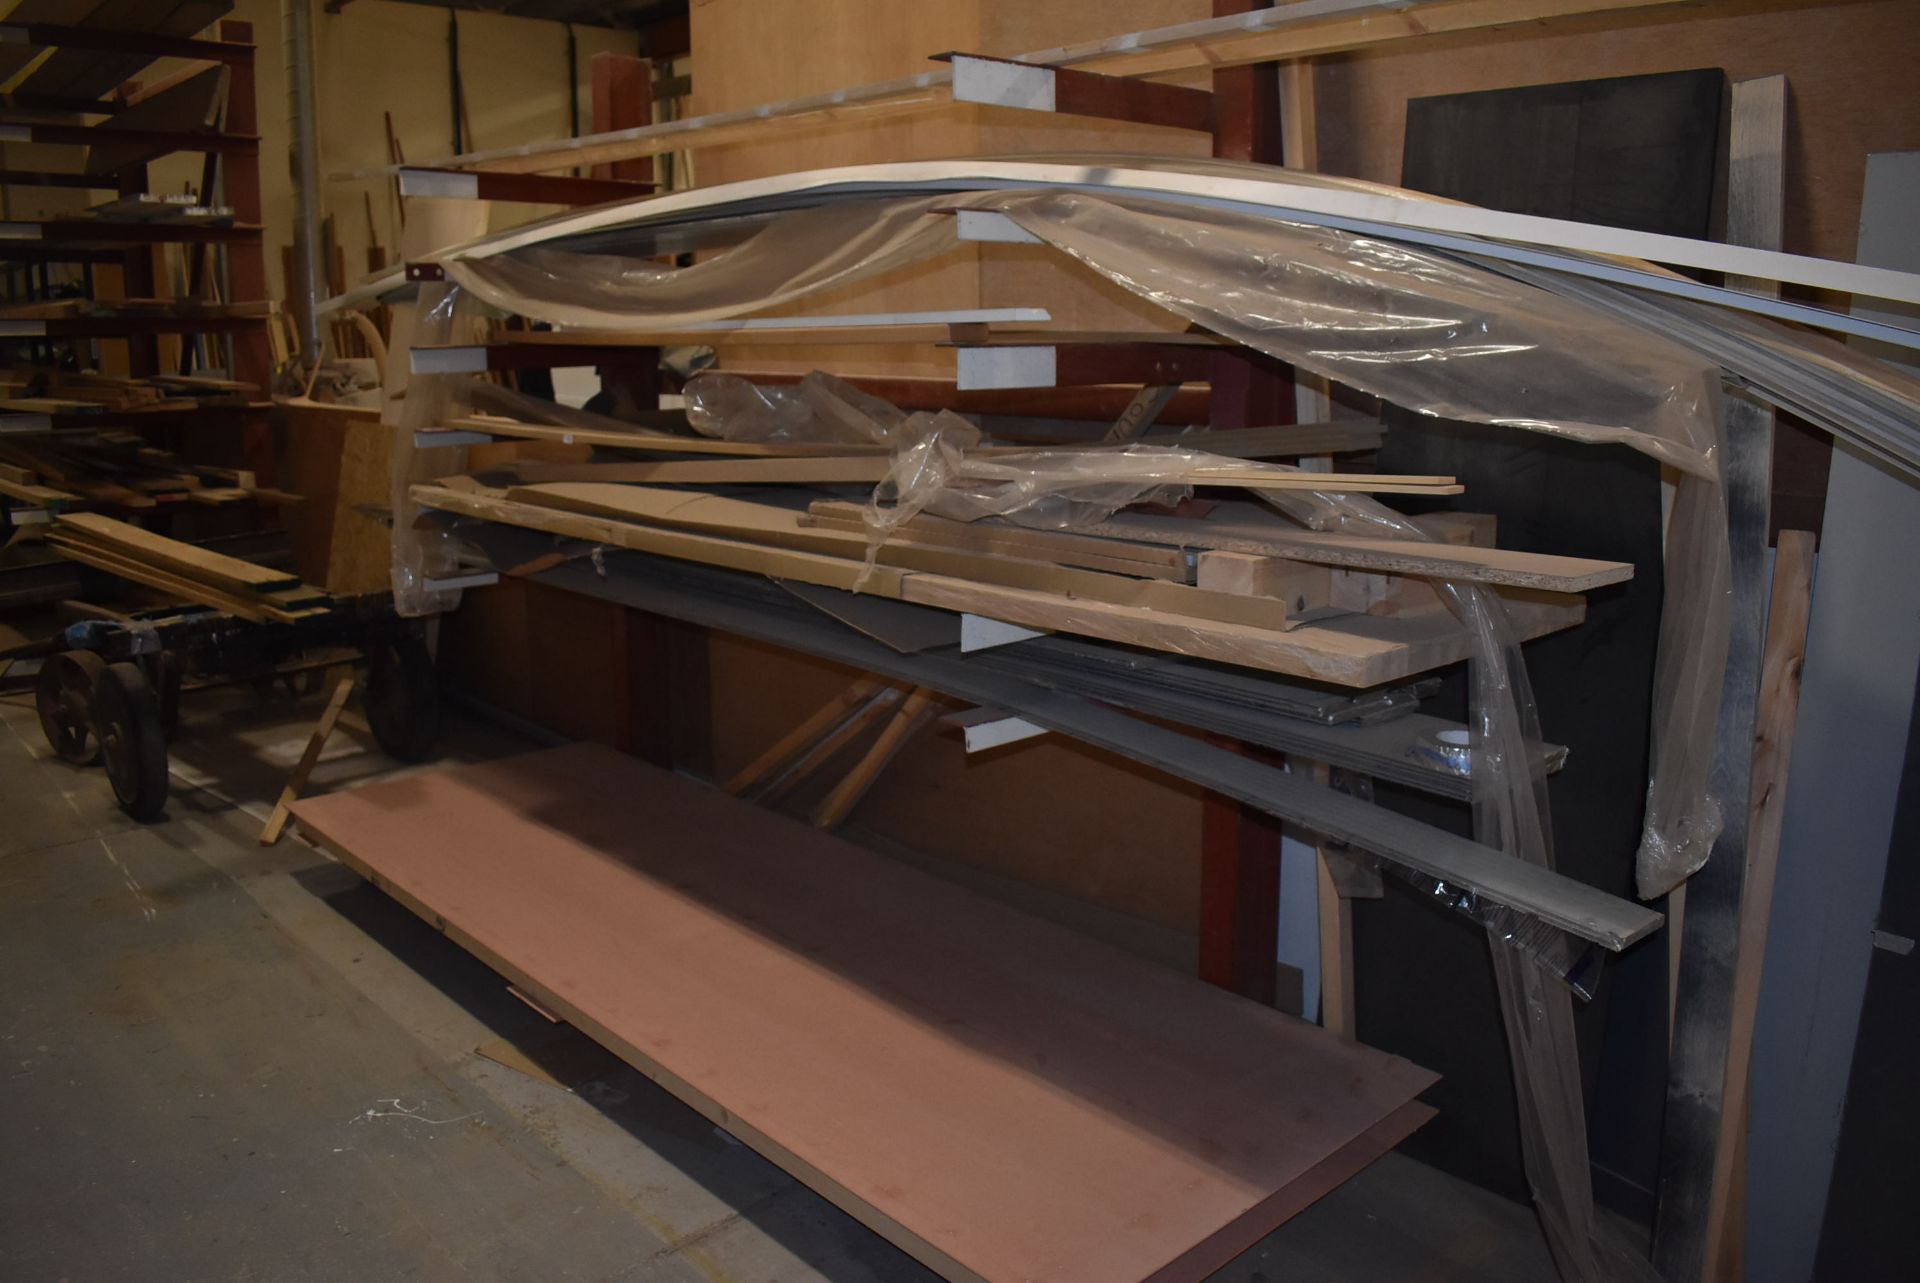 *Contents of Rack to Include Polycarbonate Sheeting, uPVC Window Boards, Butcher Block Style